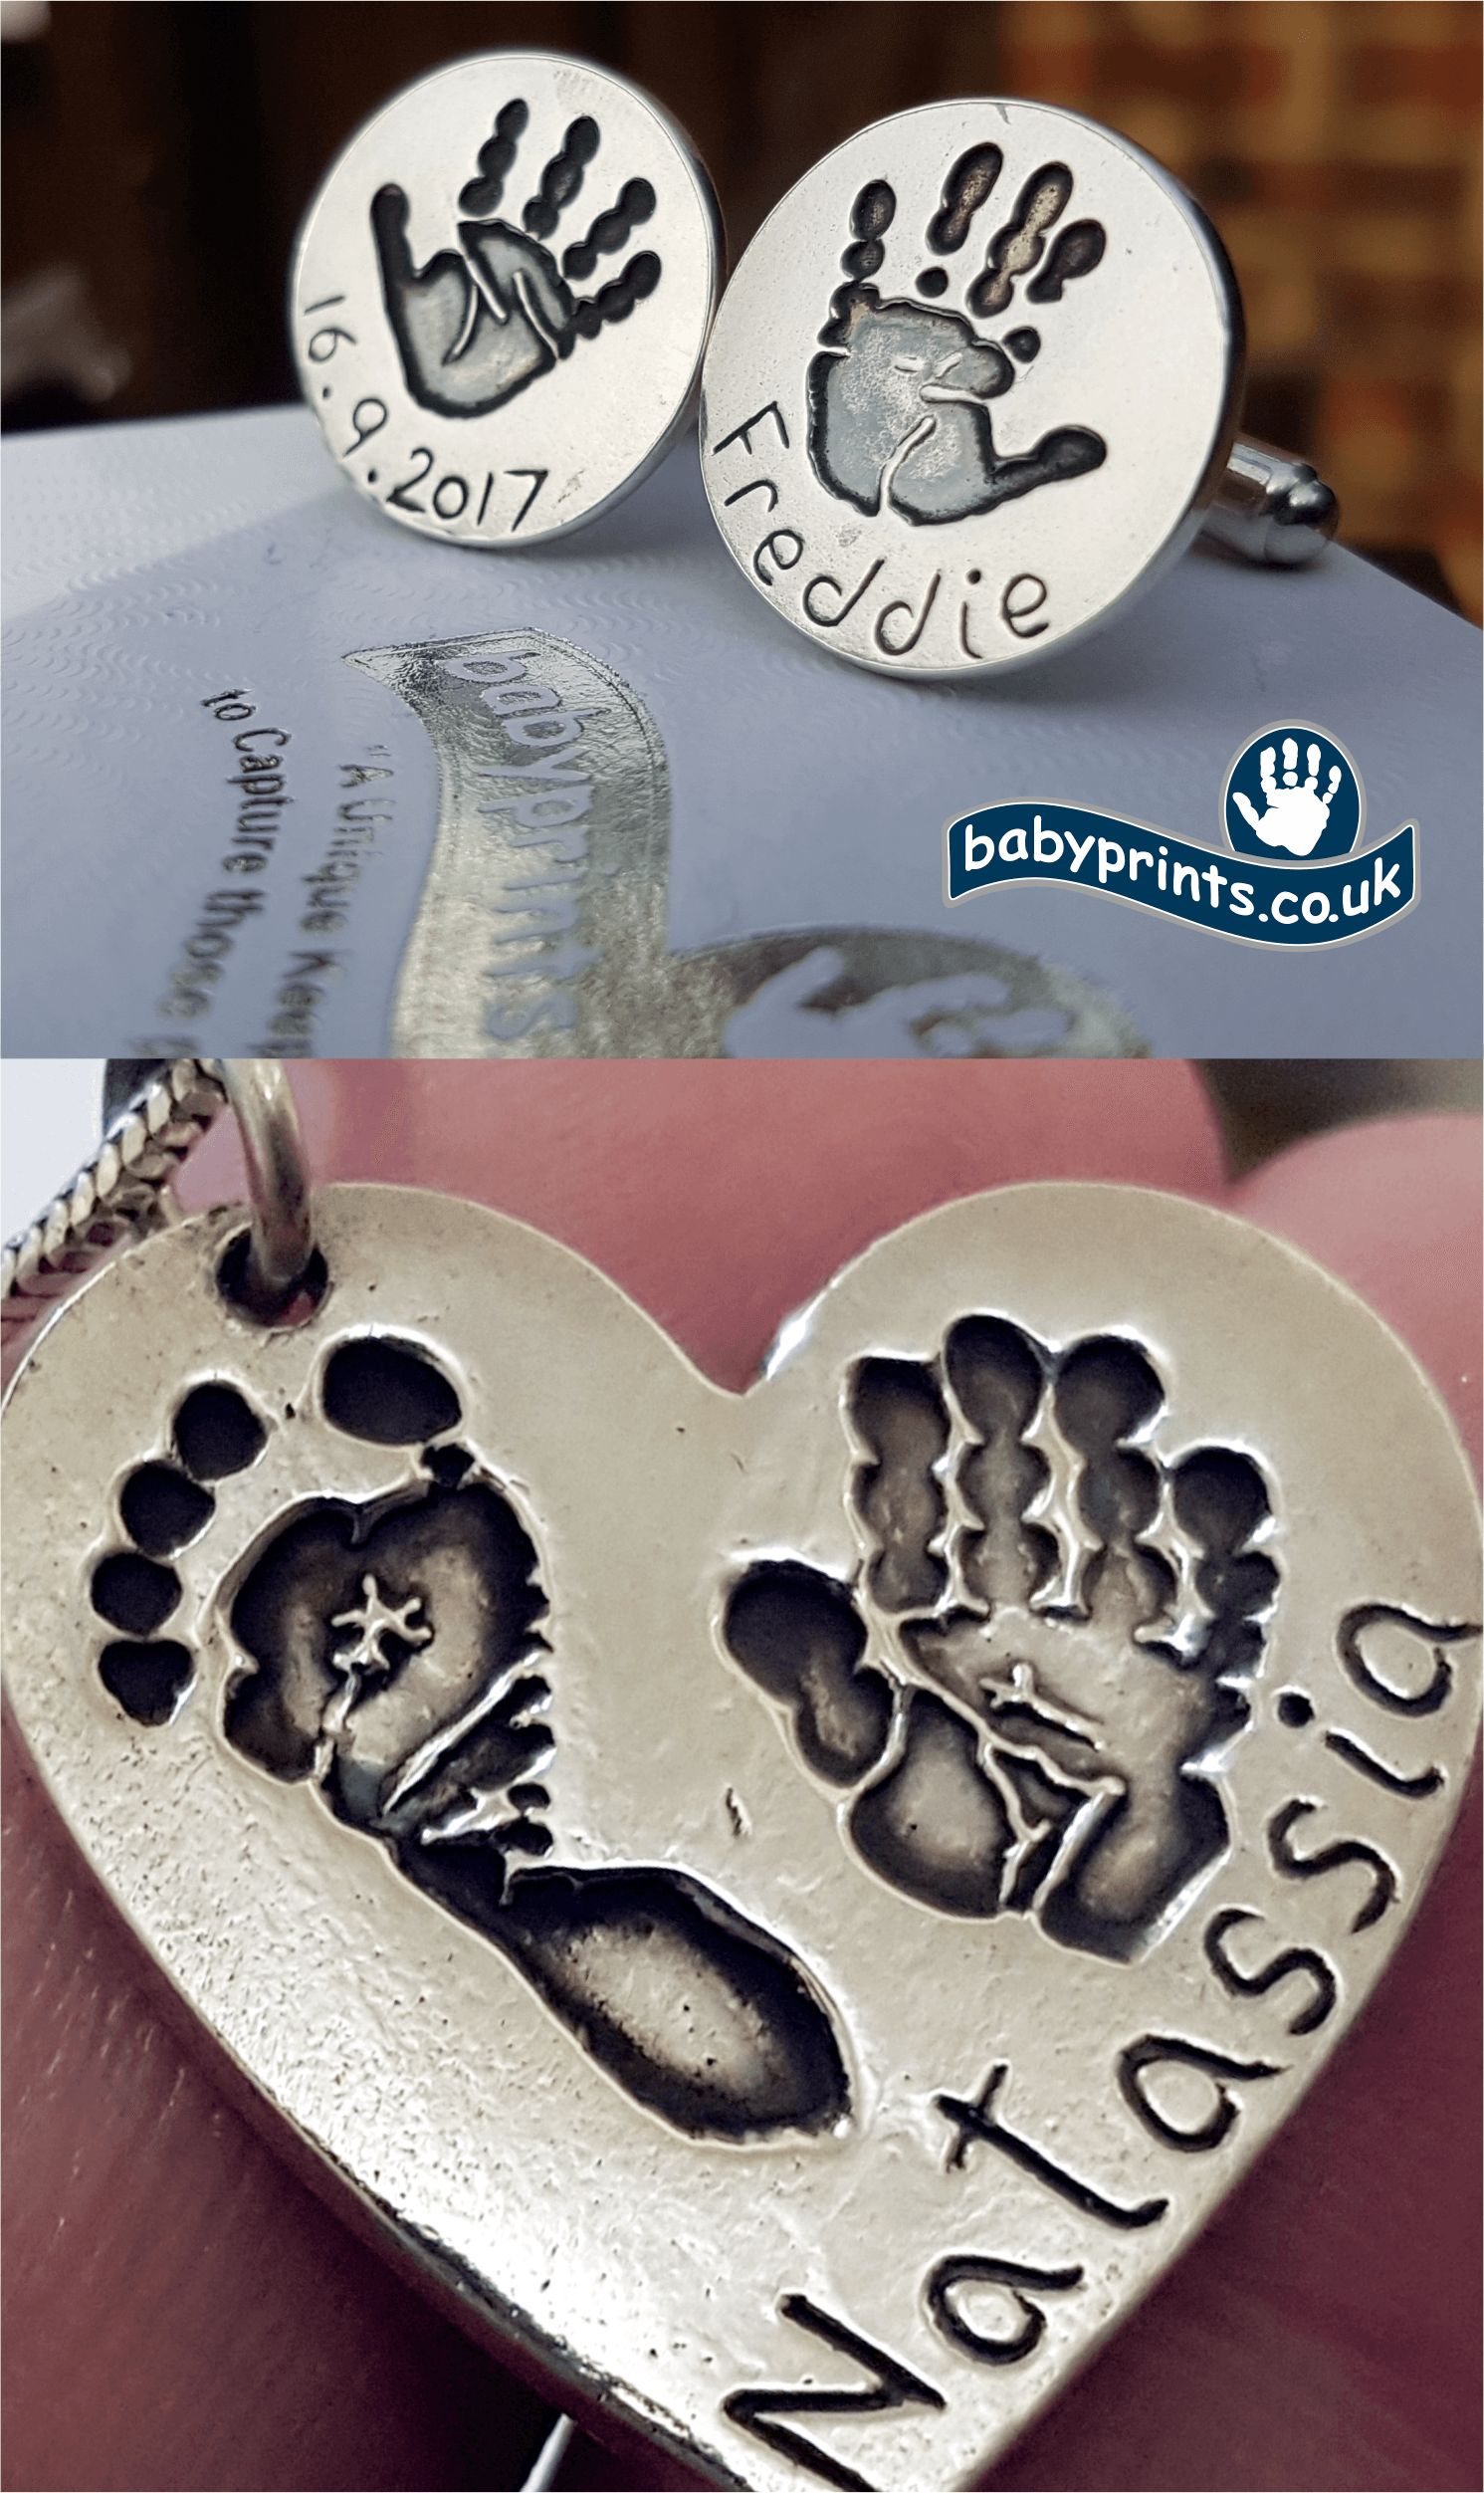 Hand and foot prints into solid silver